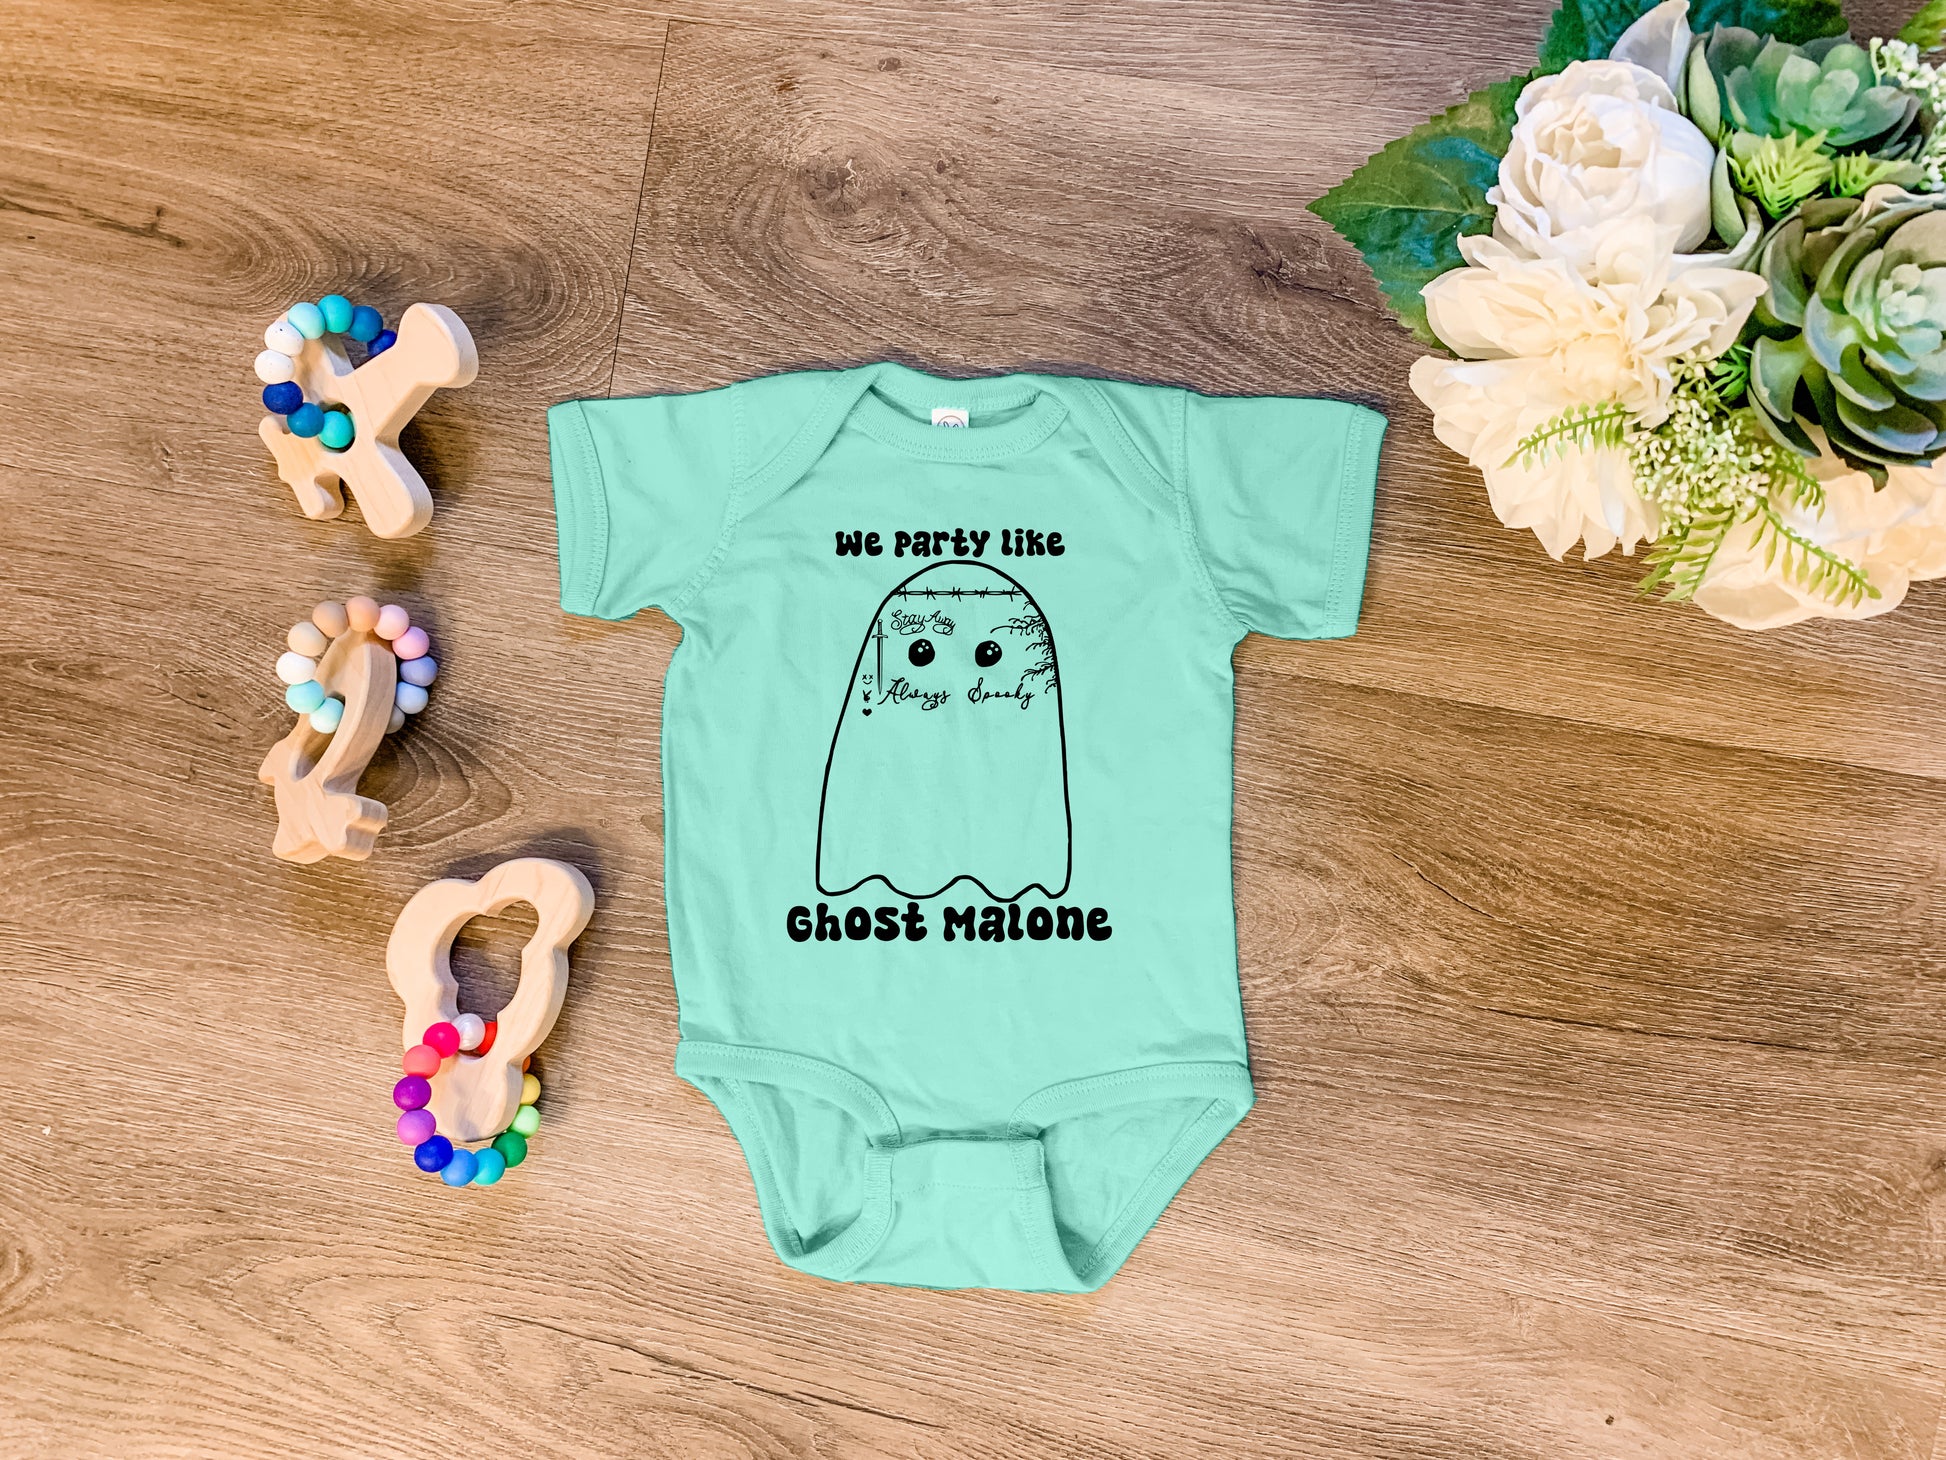 a baby bodysuit with a picture of a ghost on it